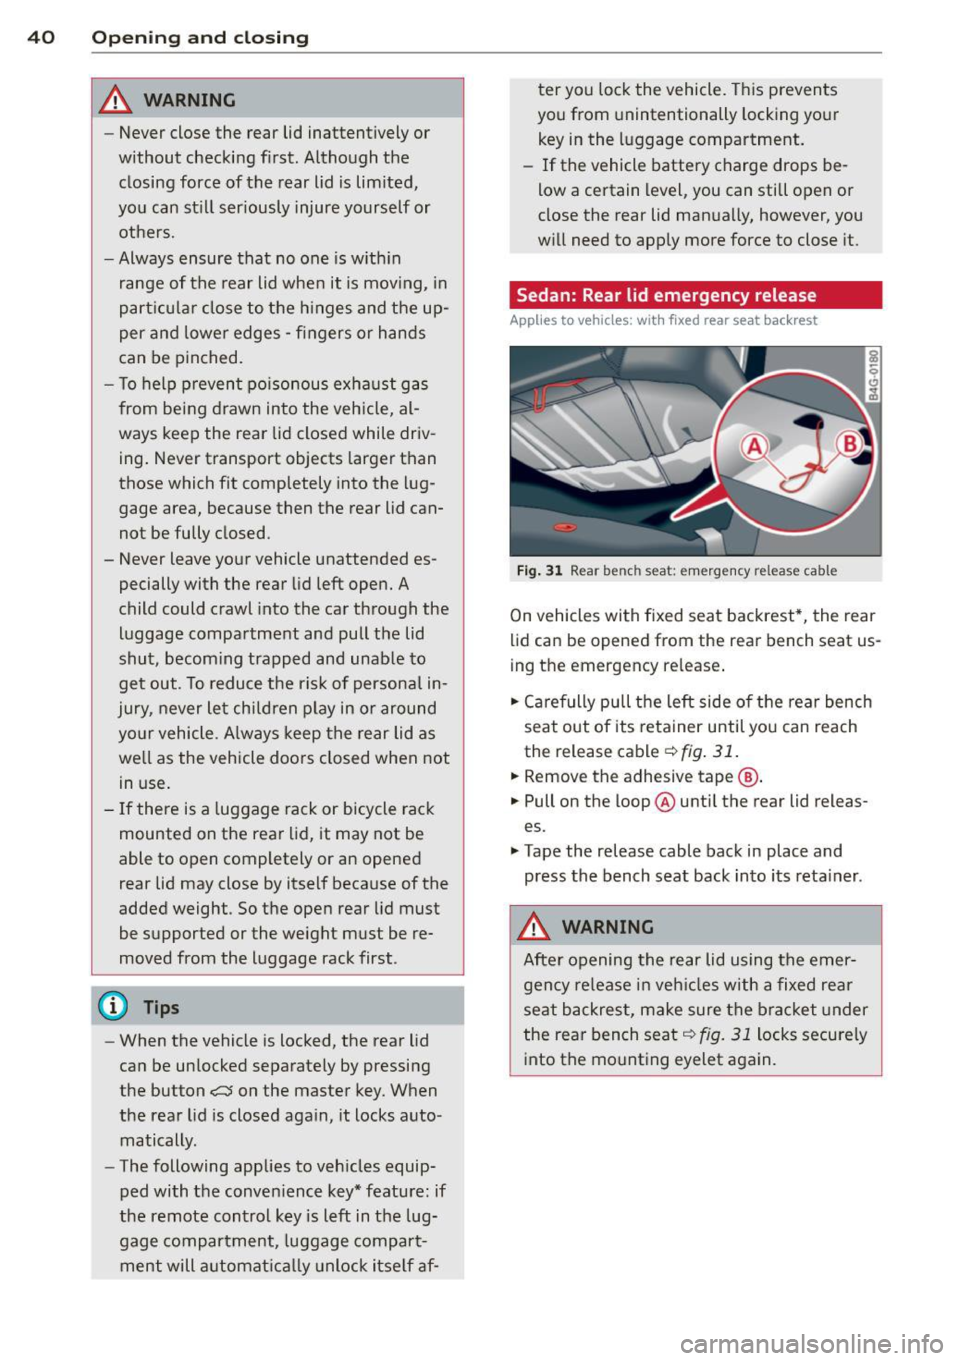 AUDI A4 2015  Owners Manual 40  Opening  and closing 
& WARNING 
-Never  close  the  rear  lid  inattentively  or 
without  checking  first.  Although  the 
closing  force  of the  rear  lid  is  limited, 
you  can  still  serio